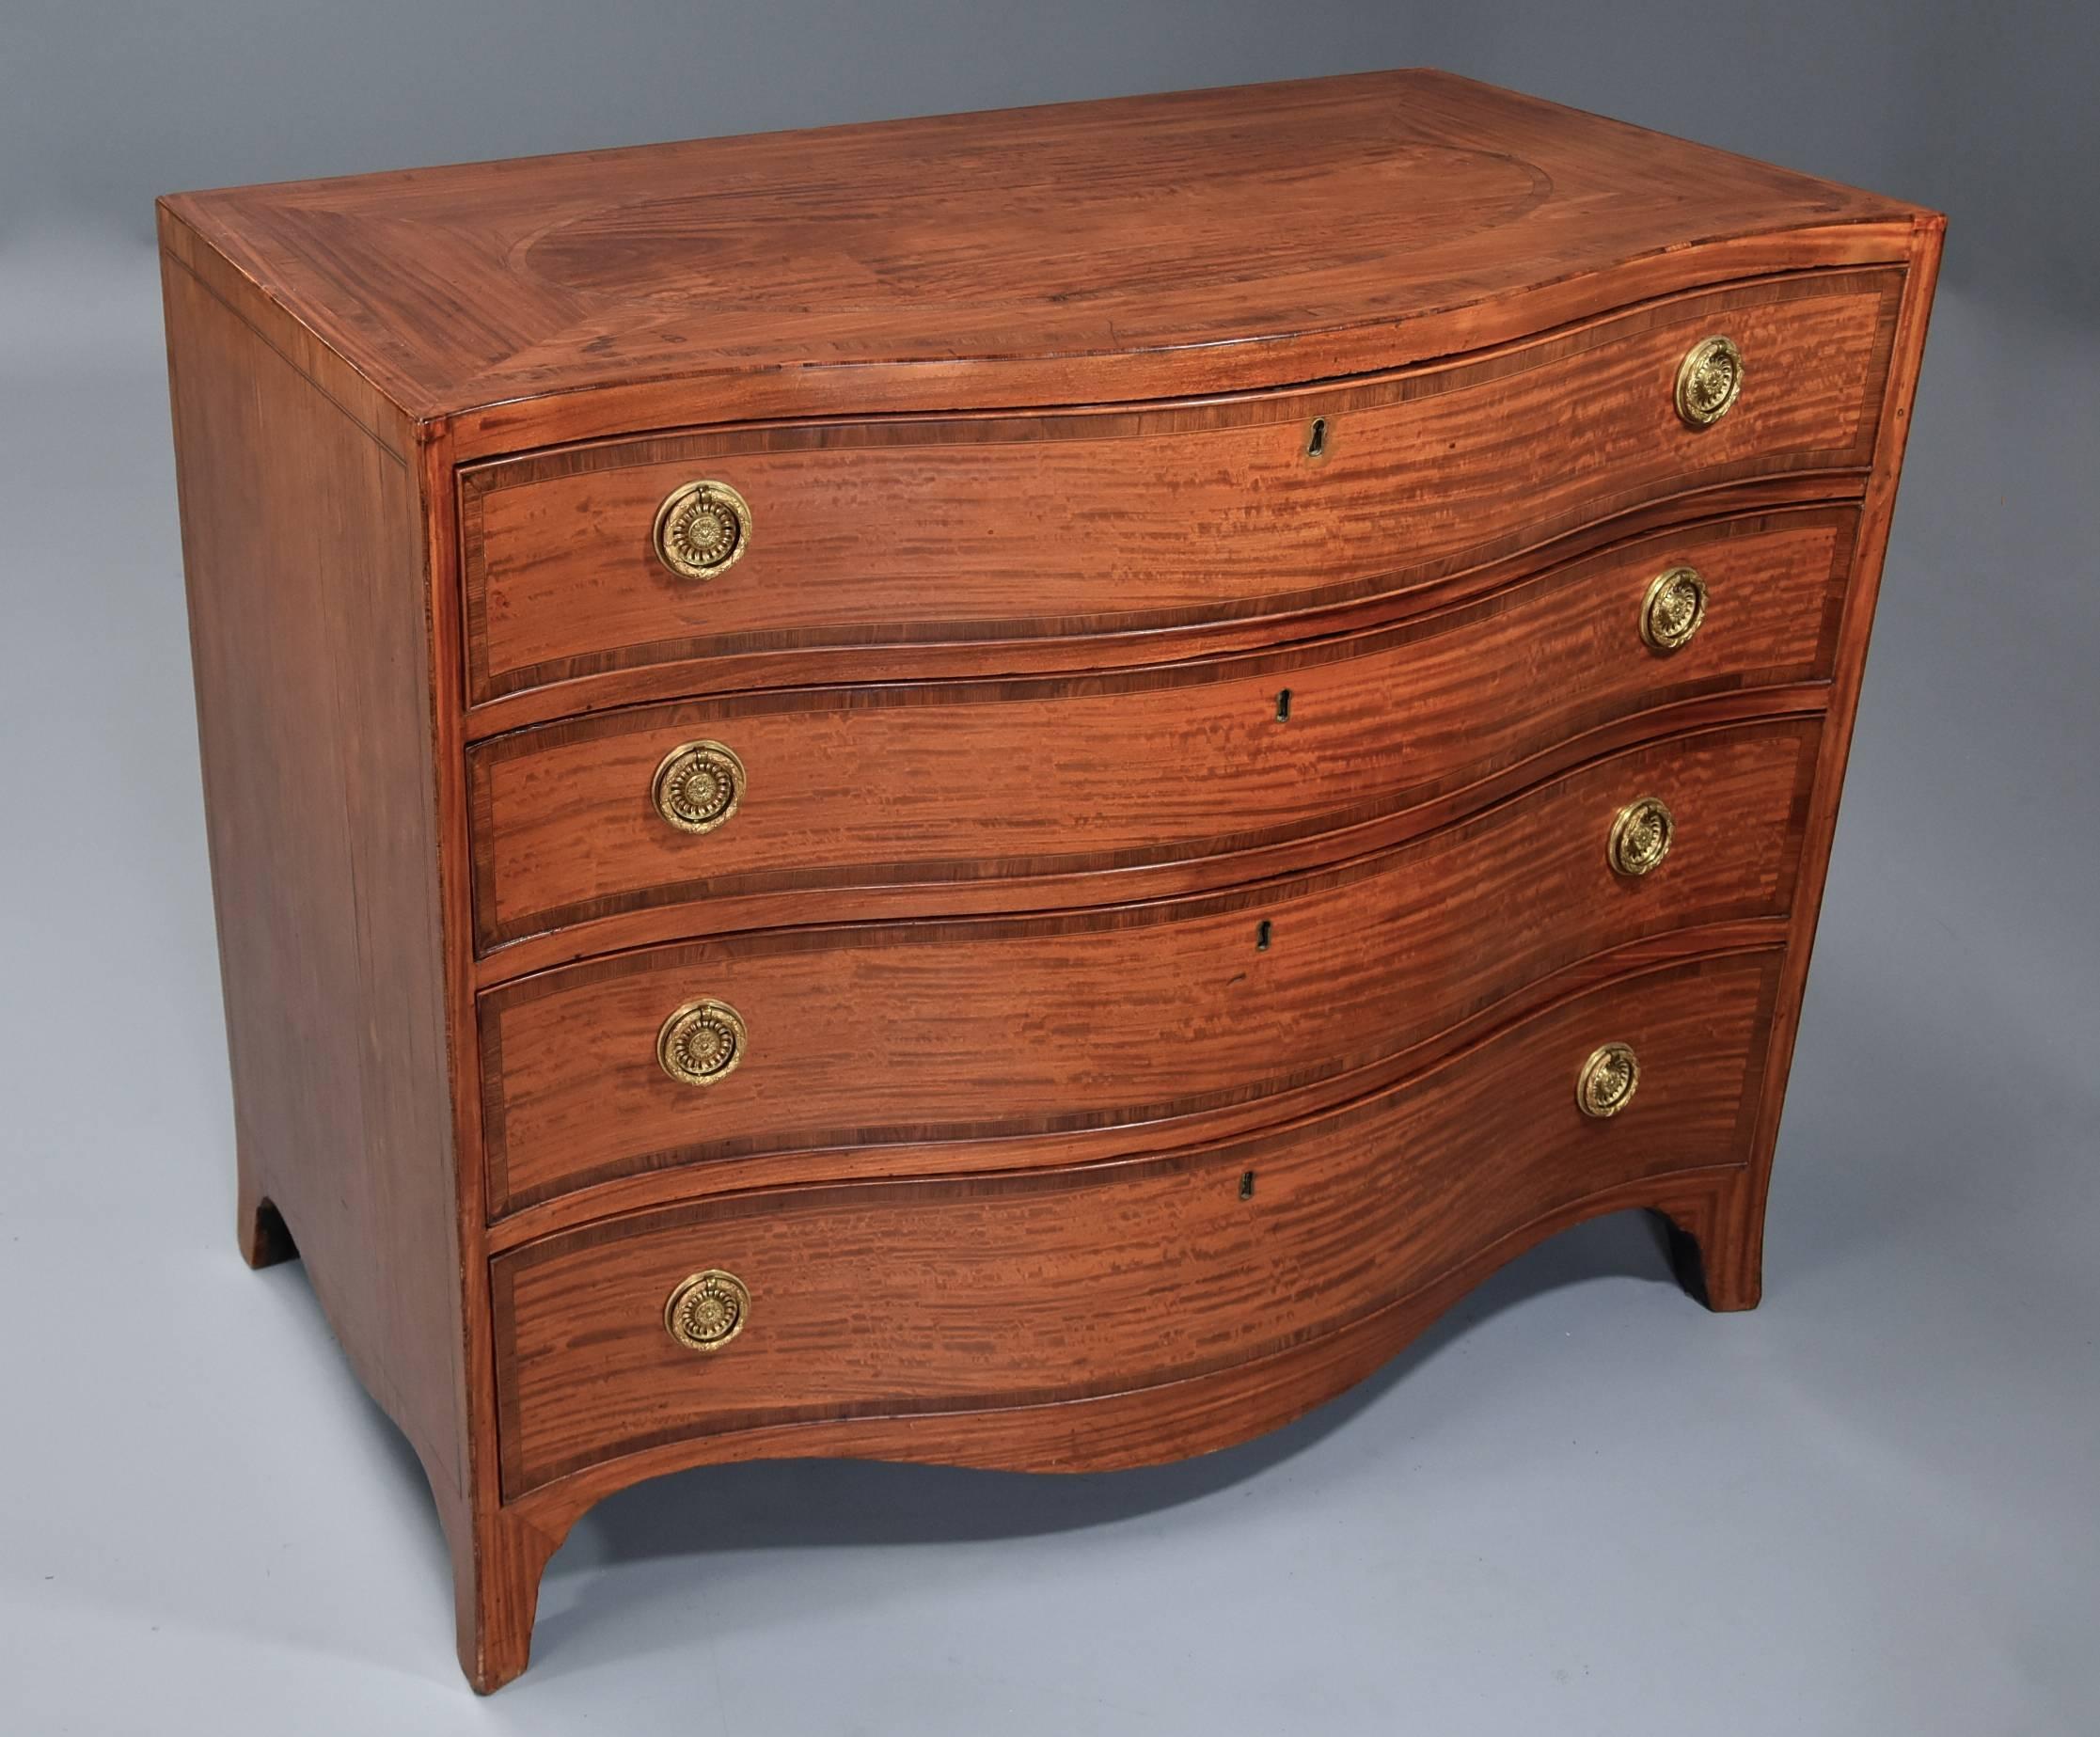 A late 18th century (circa 1790) superb quality serpentine shaped satinwood gentleman's dressing chest (or chest of drawers).

This fine example consists of a finely figured satinwood veneered top, serpentine shaped to the front, with central oval